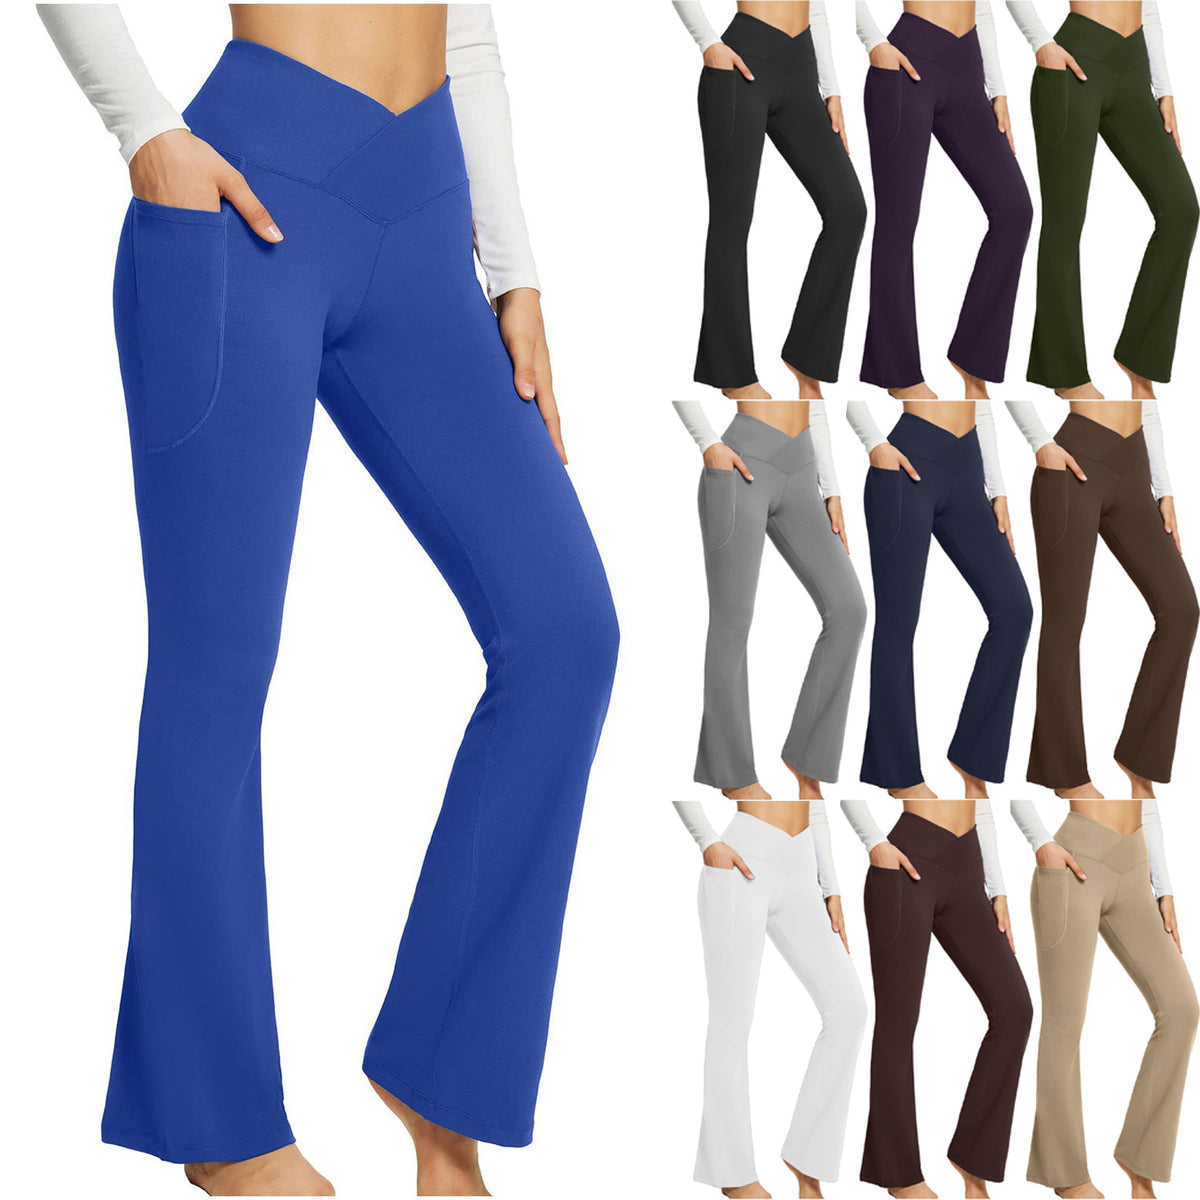 Solid Color Casual High Waist Slim Fit Wide Bootcut Trousers Leg Yoga Women's Pants